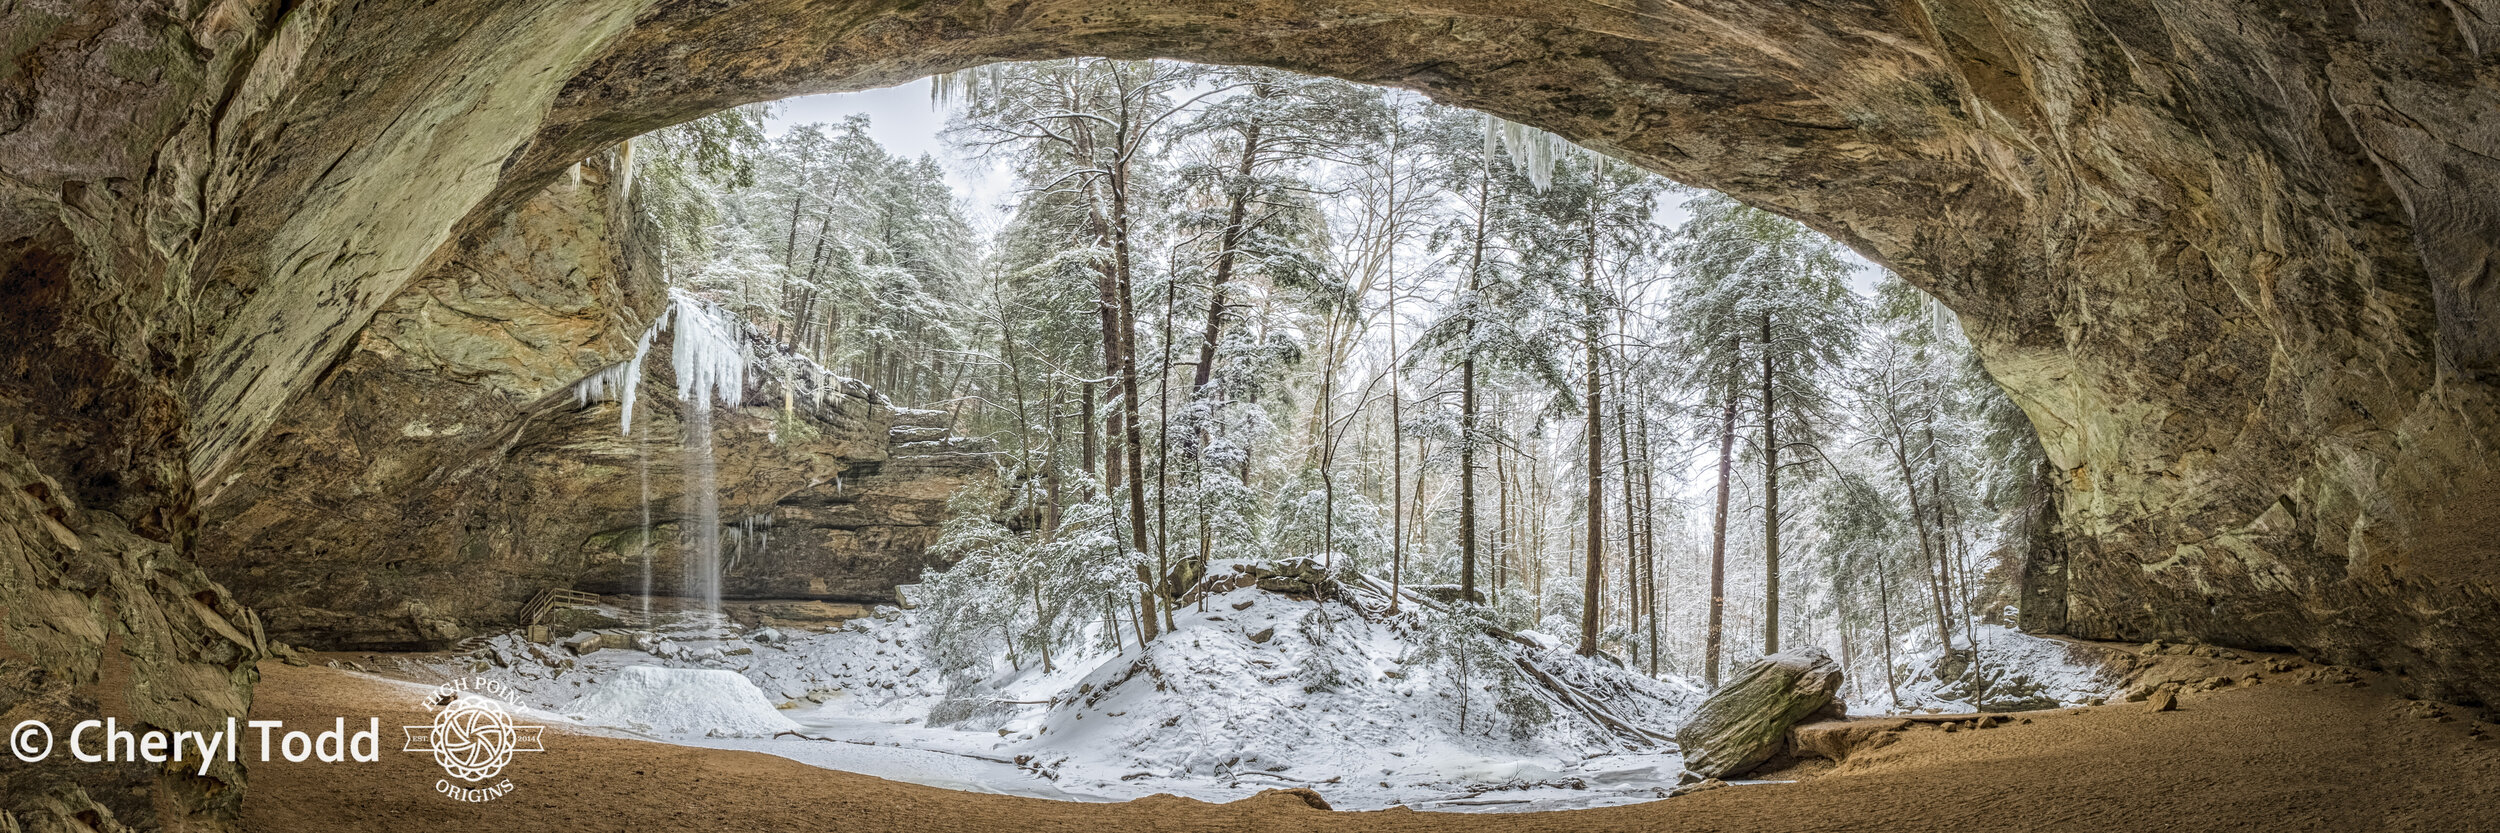 Ash Cave Winter View - 10x30 Panorama